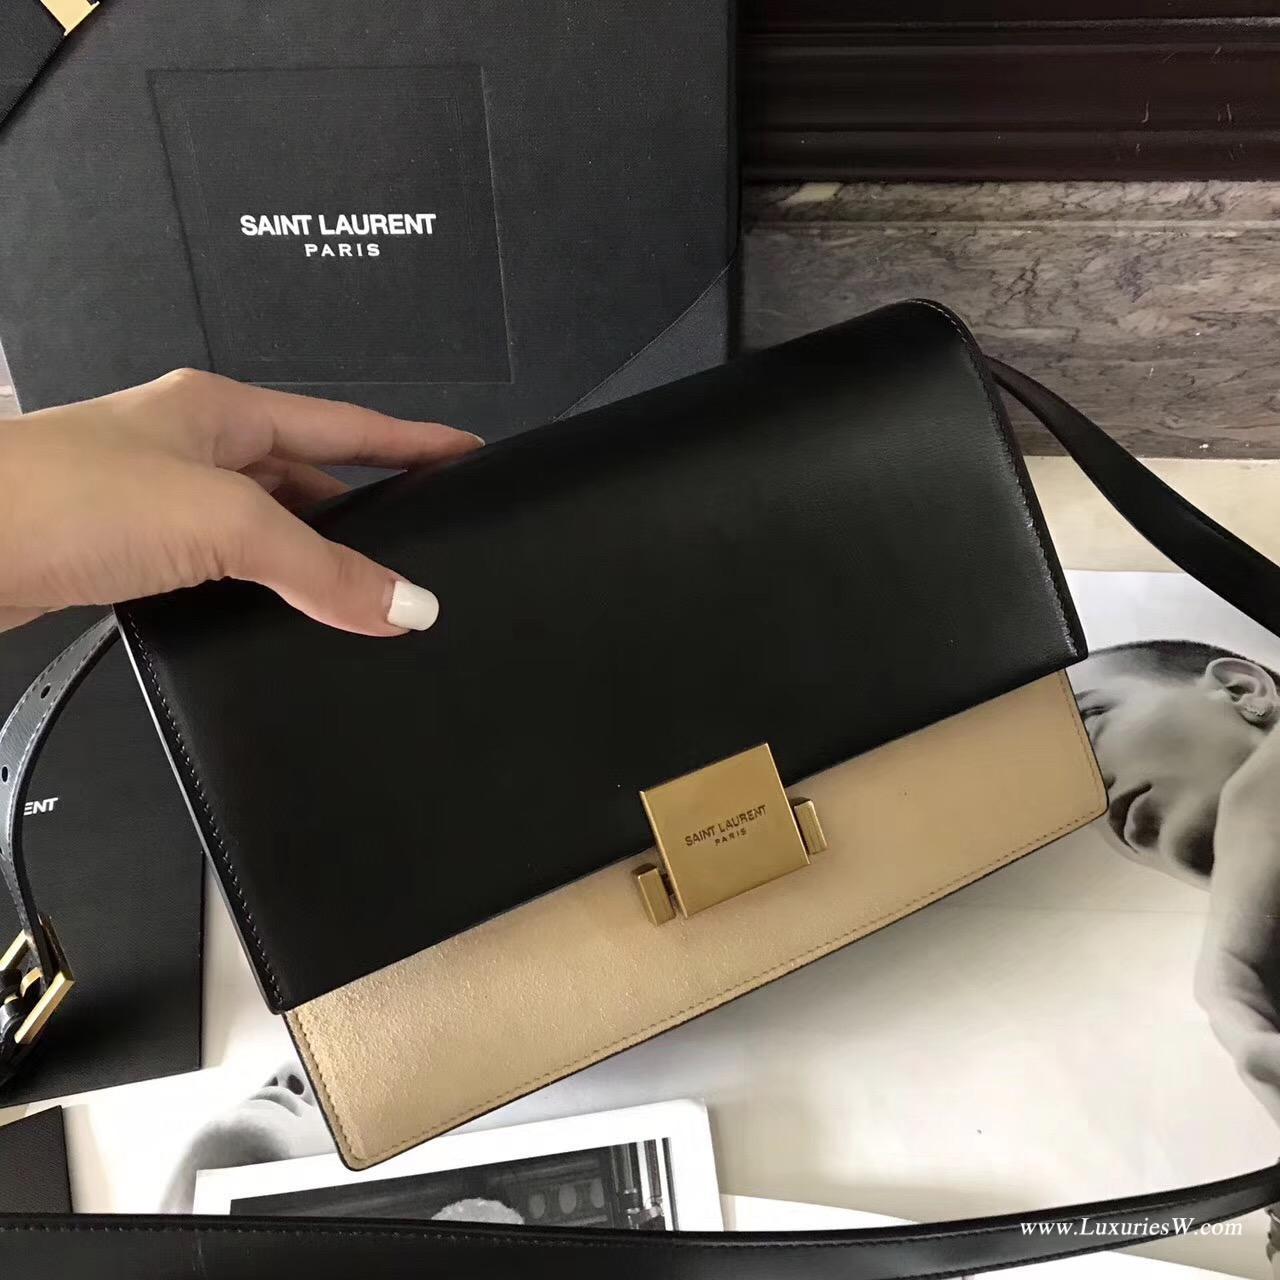 YSL Medium BELLECHASSE SAINT LAURENT bag in black leather and taupe suede